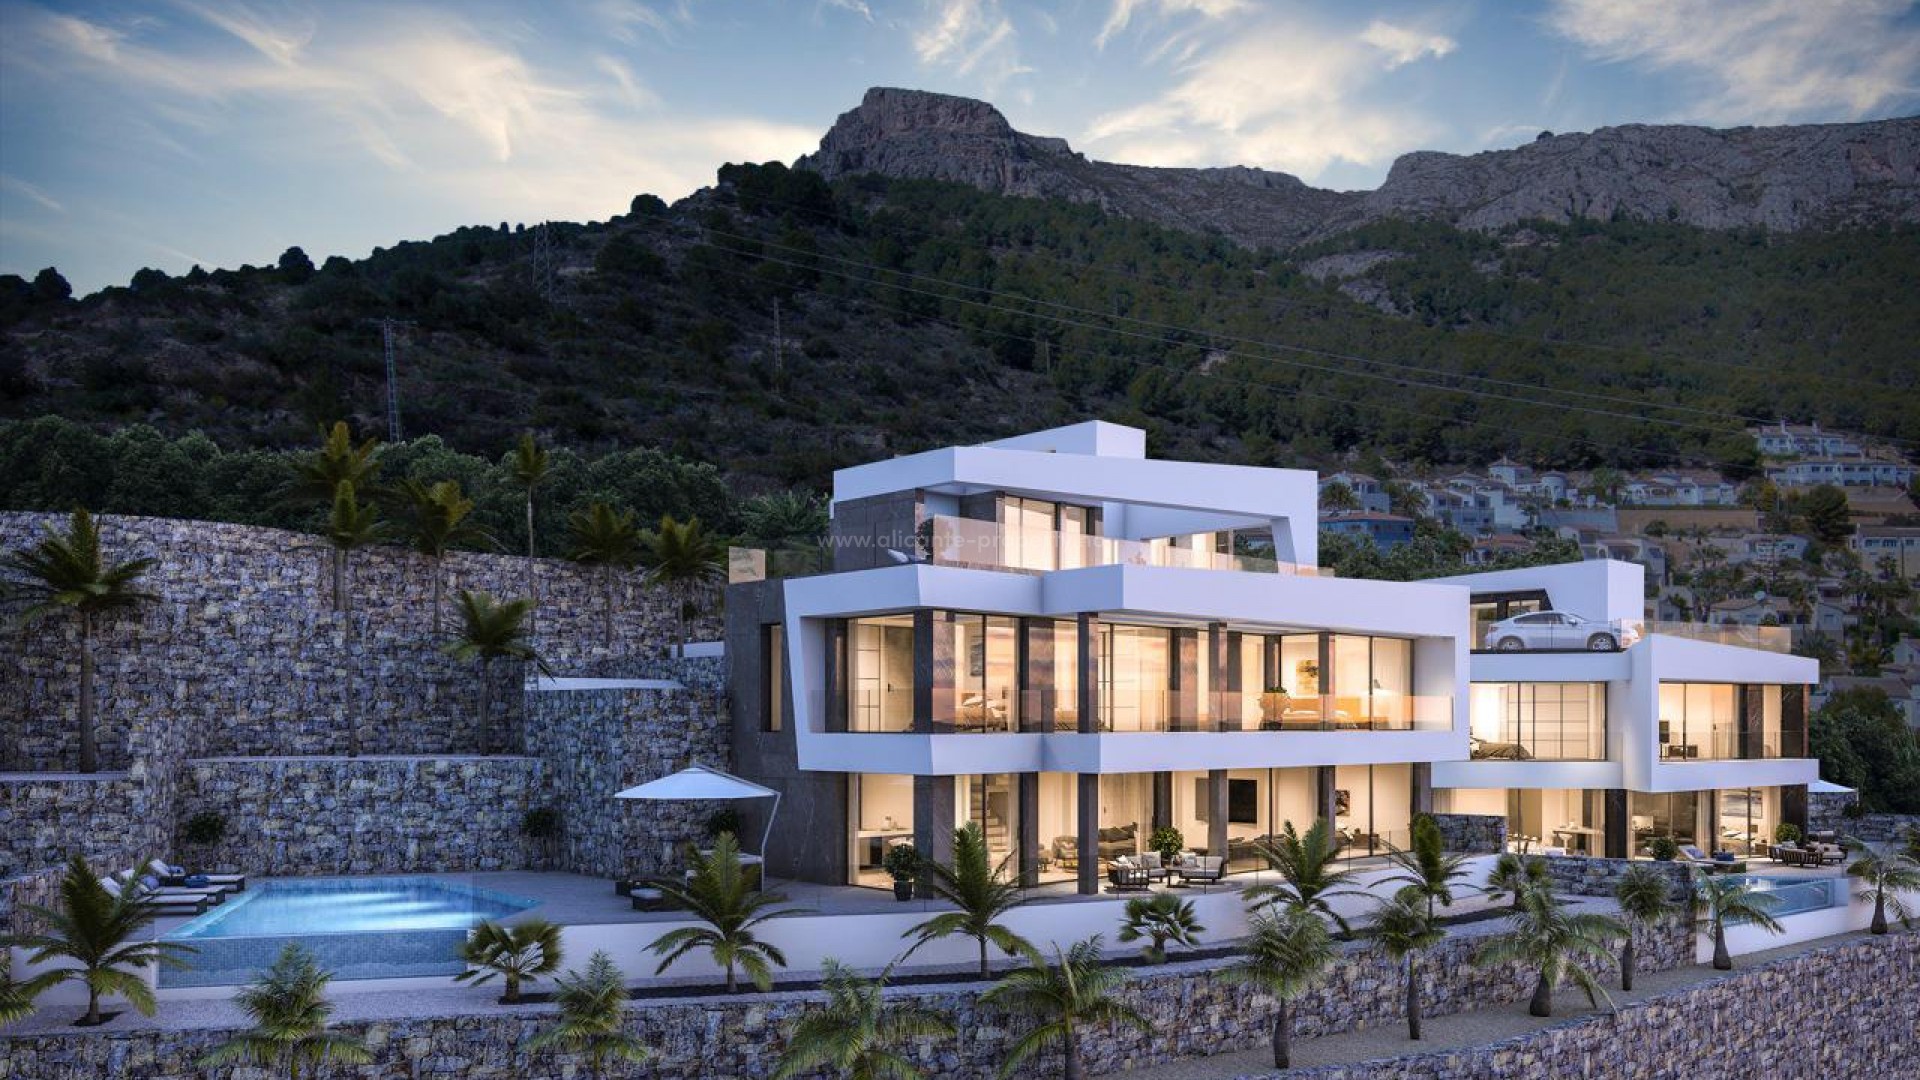 Modern luxury villa with fantastic sea view with 4 bedrooms and 6 bathrooms, 3 floors with lift, large swimming pool with fantastic view